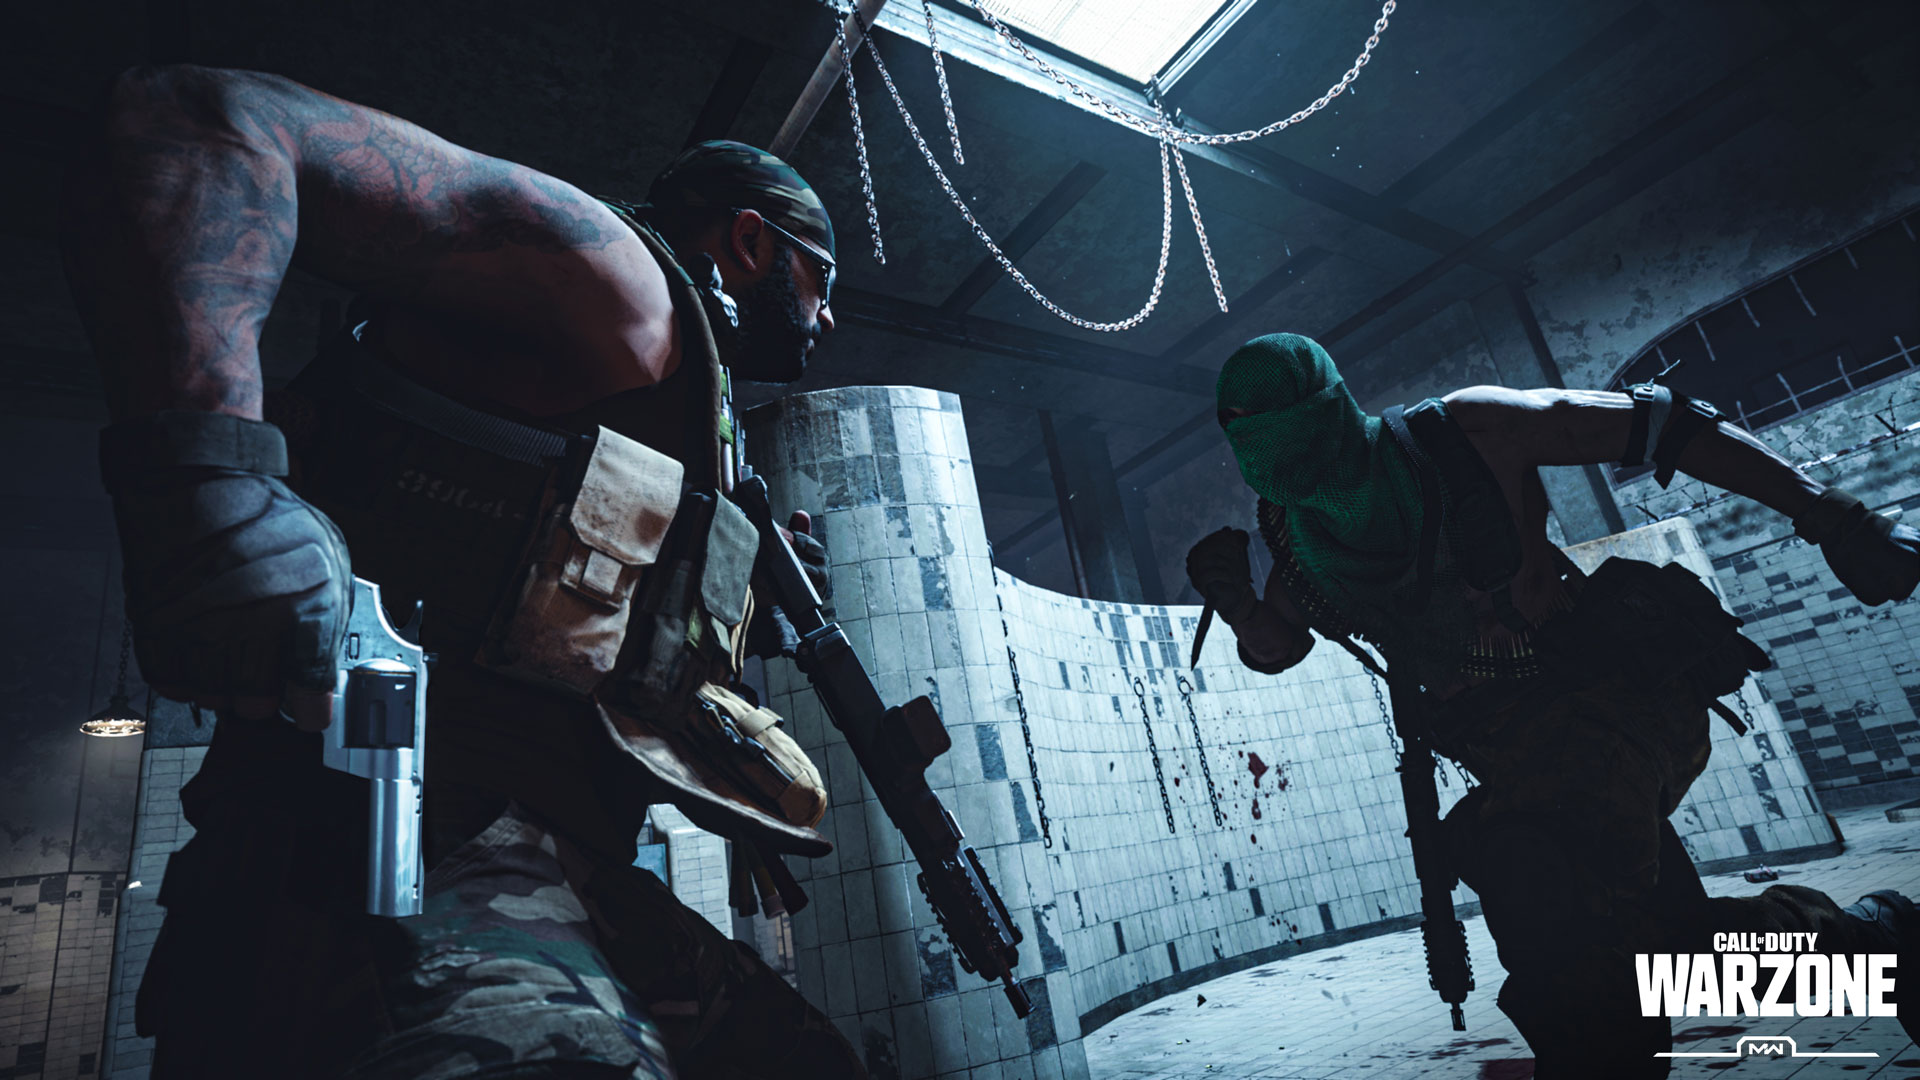 You can respawn in Call of Duty: Warzone by winning a 1-vs-1 in prison |  Dot Esports